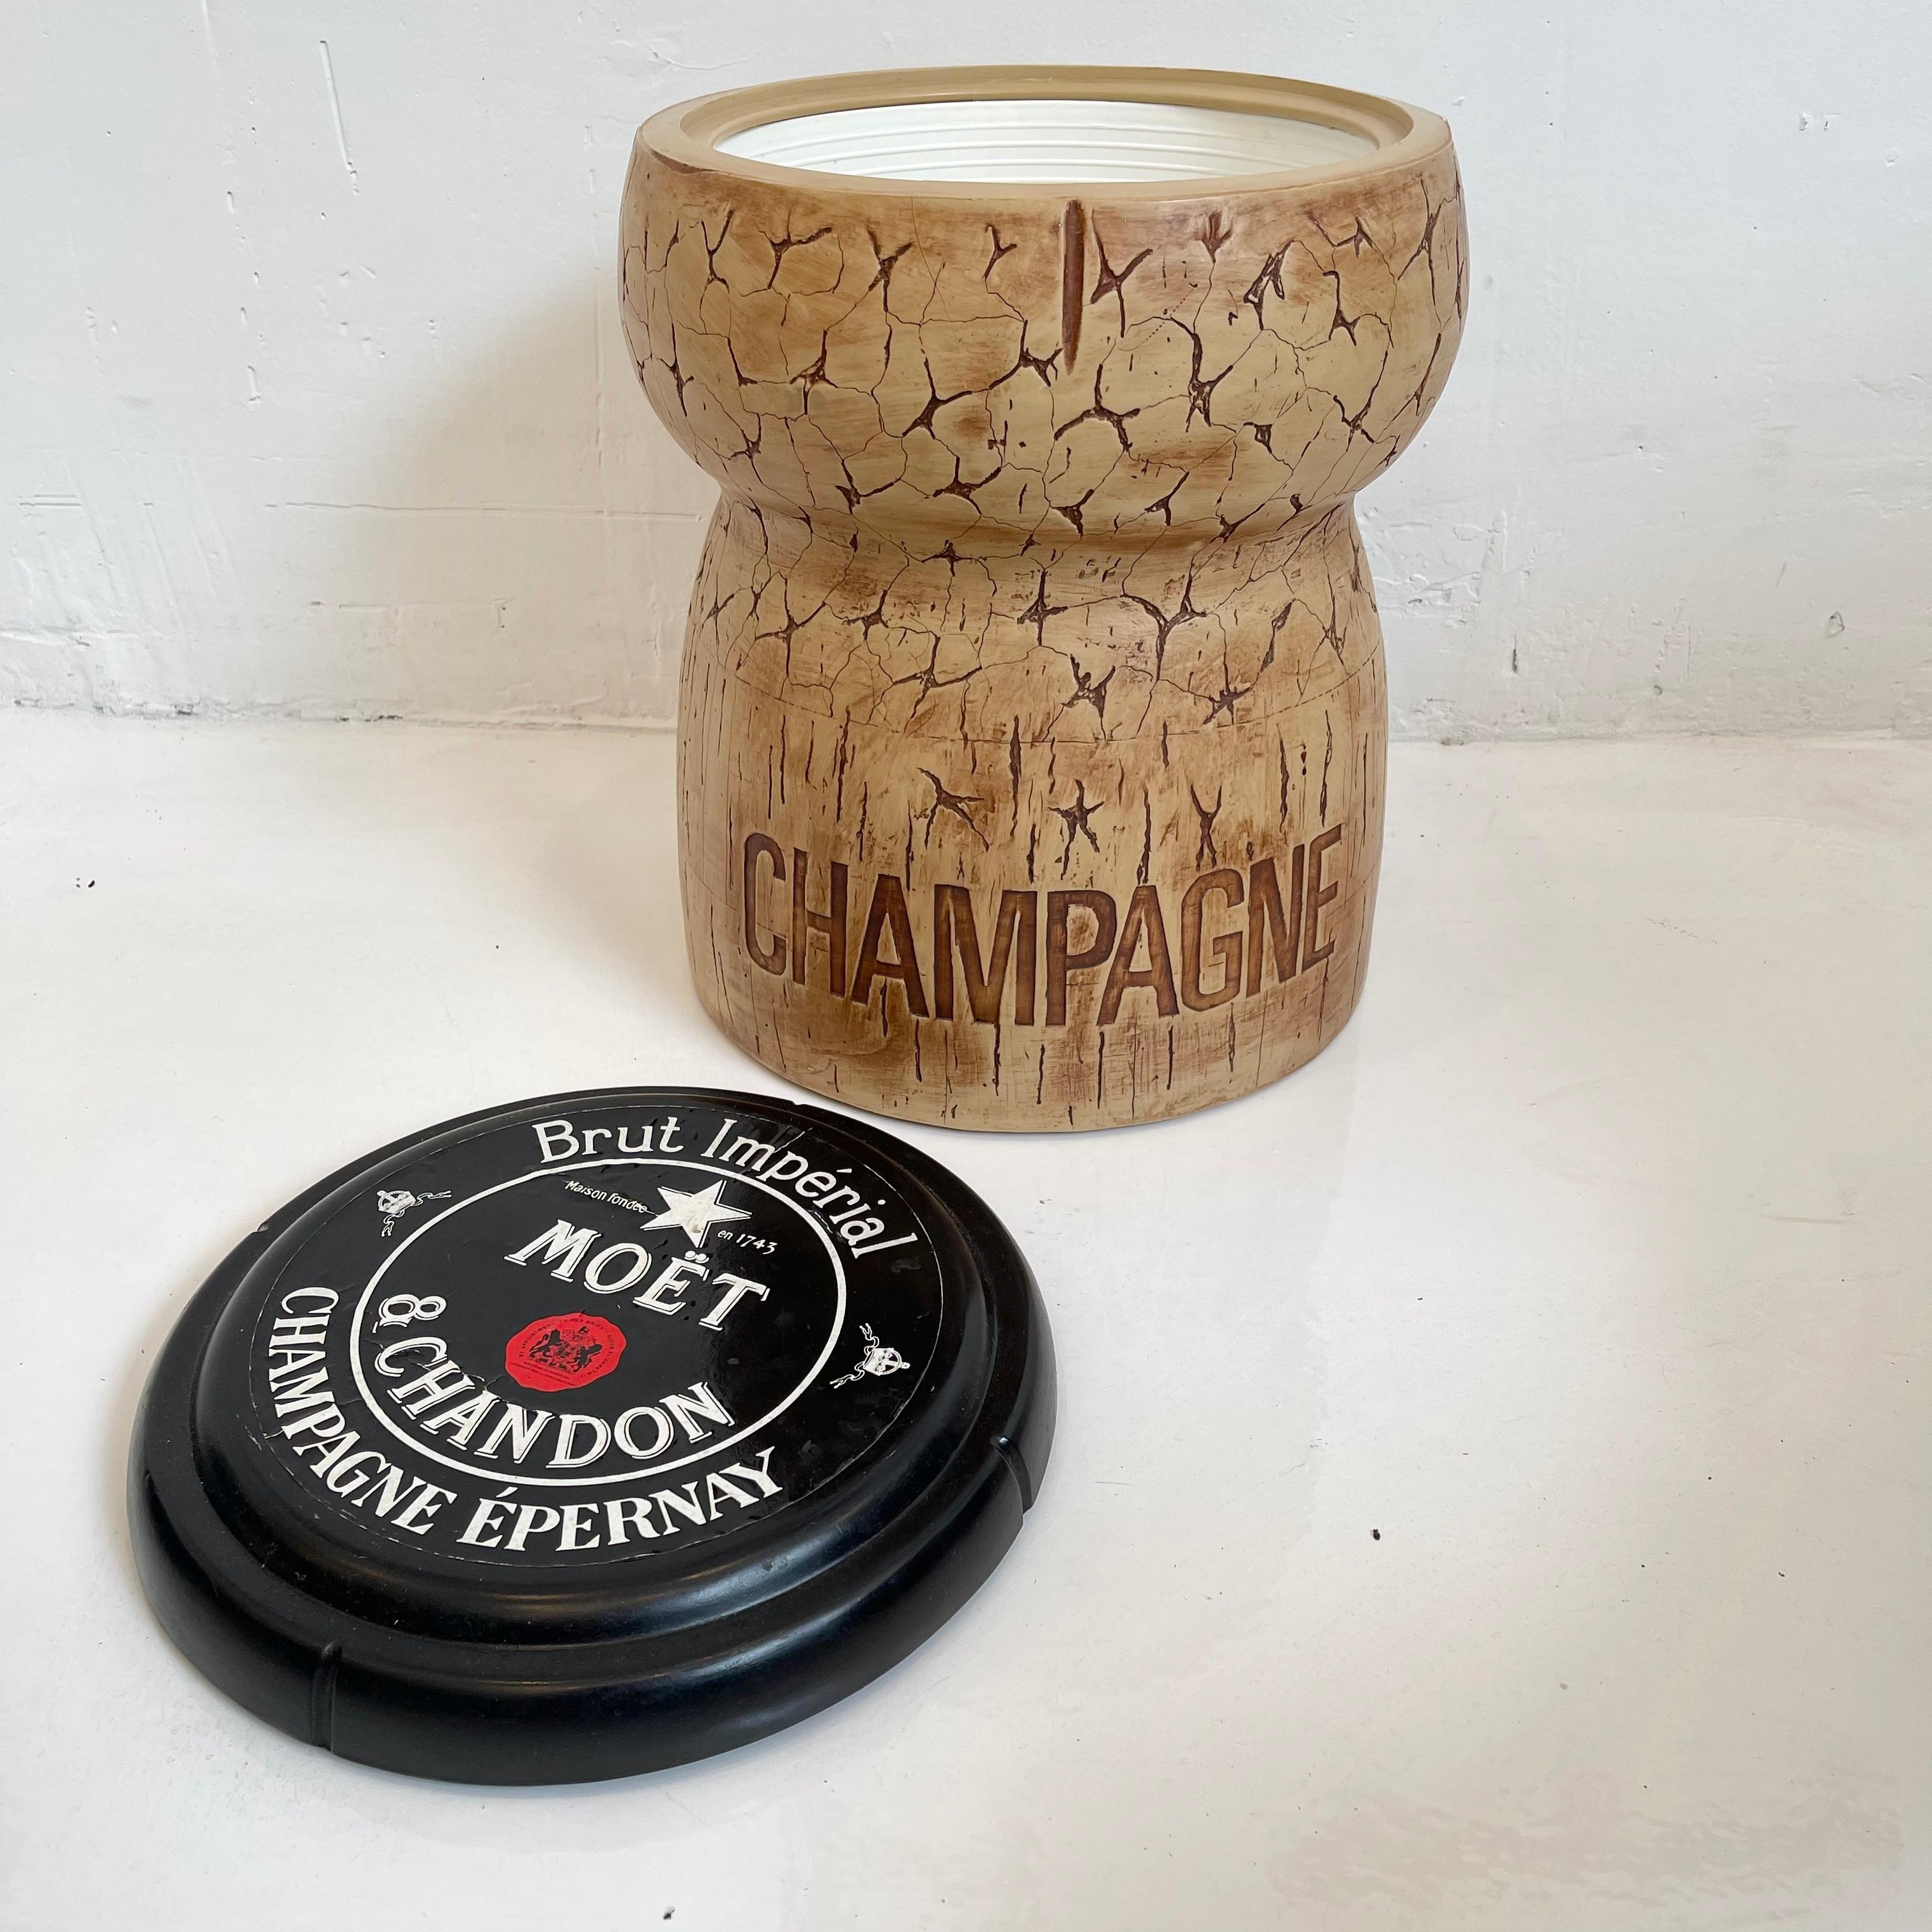 Whimsical champagne bucket/cooler by Think Big. Made in New York City, 1987. Stamped on underside. In the shape of champagne cork by Moet & Chandon. Made of plastic and rubber. Inside of cooler has plastic bucket to hold water/ice. Great